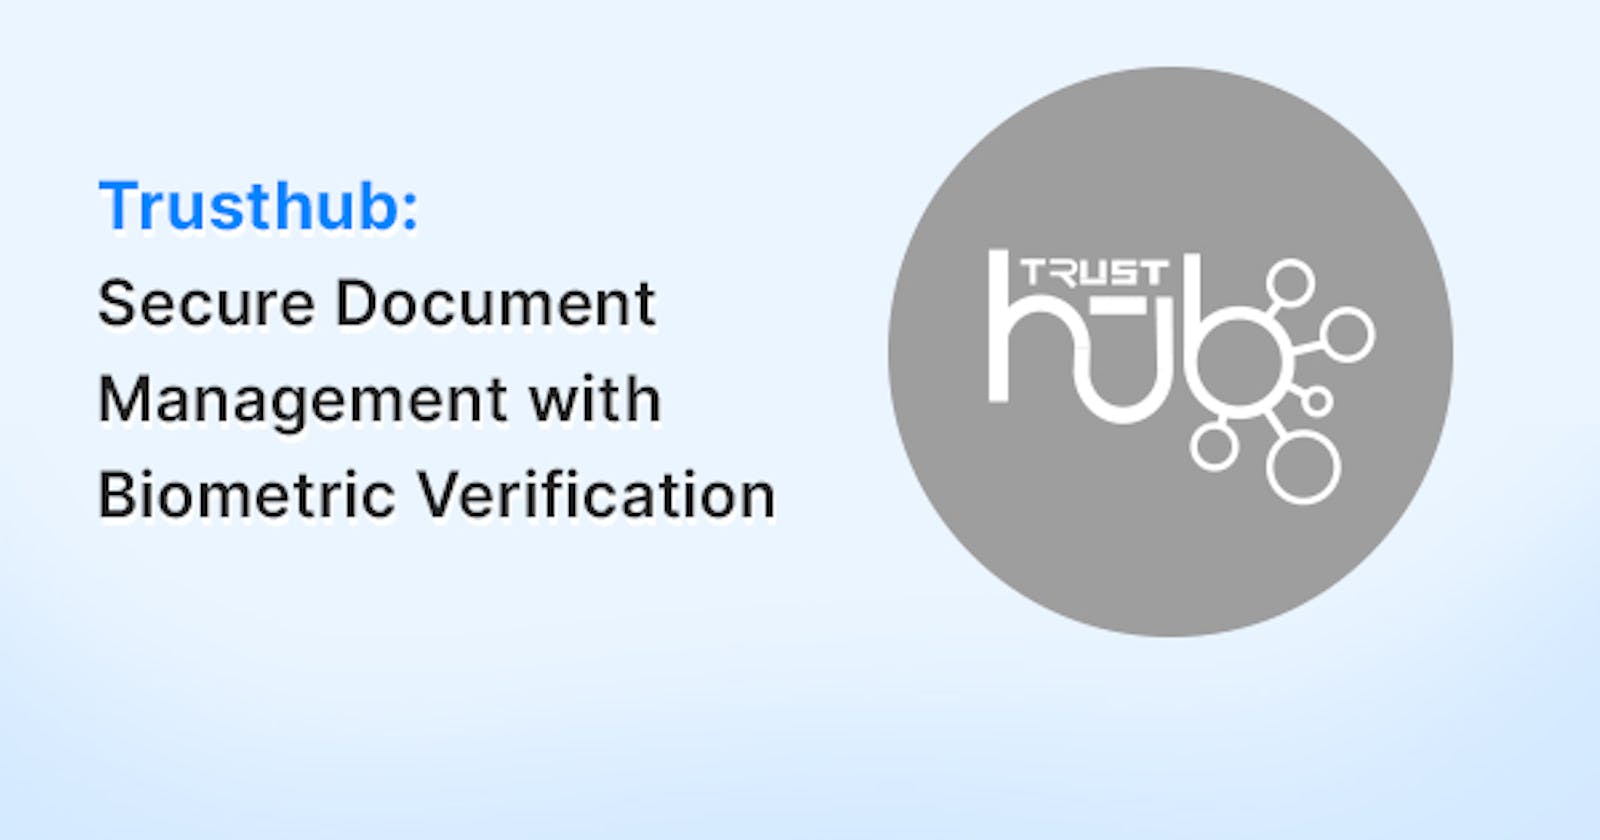 Trusthub: Secure Document Management with Biometric Verification